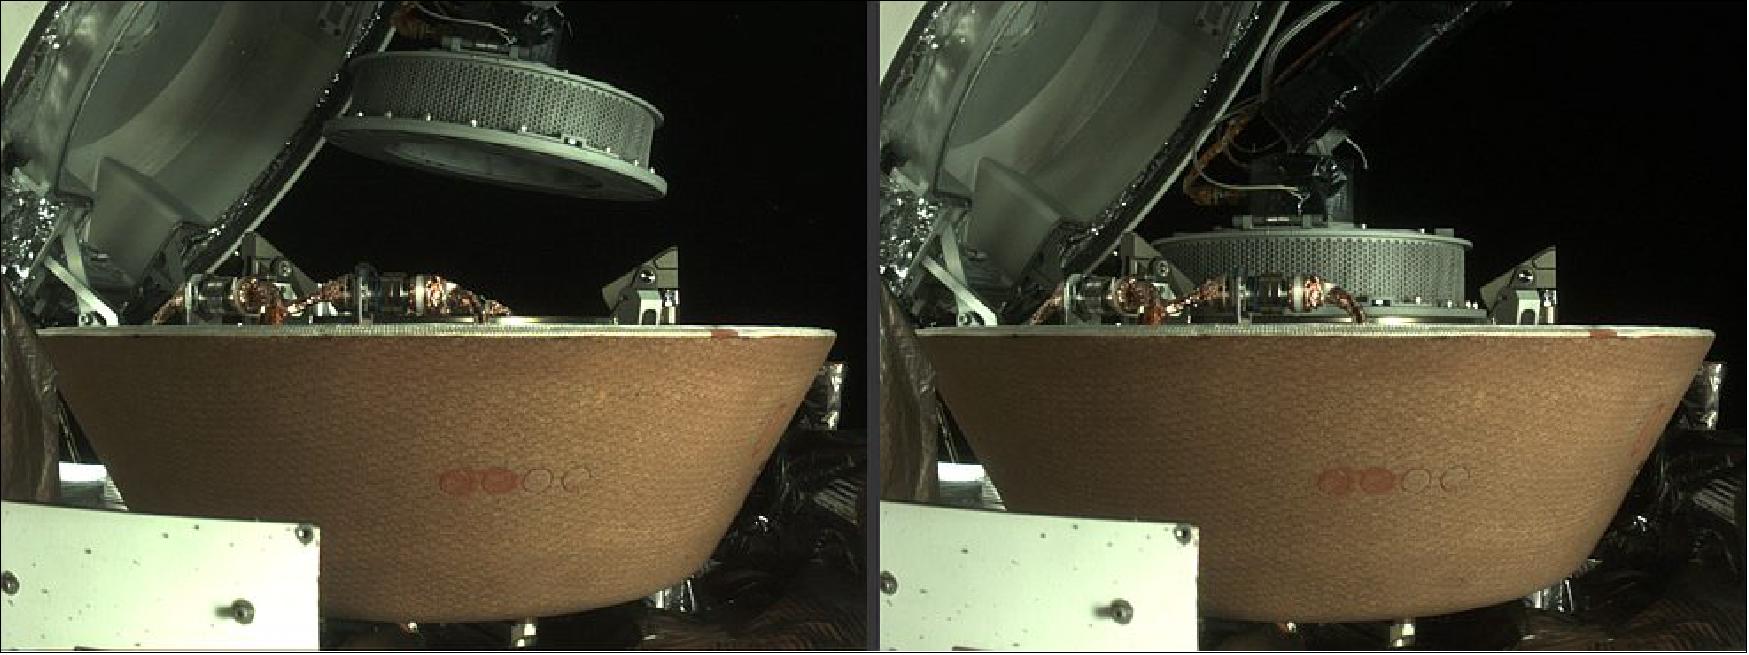 Figure 22: The left image shows the OSIRIS-REx collector head hovering over the Sample Return Capsule (SRC) after the TAGSAM (Touch-And-Go Sample Acquisition Mechanism) arm moved it into the proper position for capture. The right image shows the collector head secured onto the capture ring in the SRC. Both images were captured by the StowCam camera (image credits: NASA/Goddard/University of Arizona/Lockheed Martin)